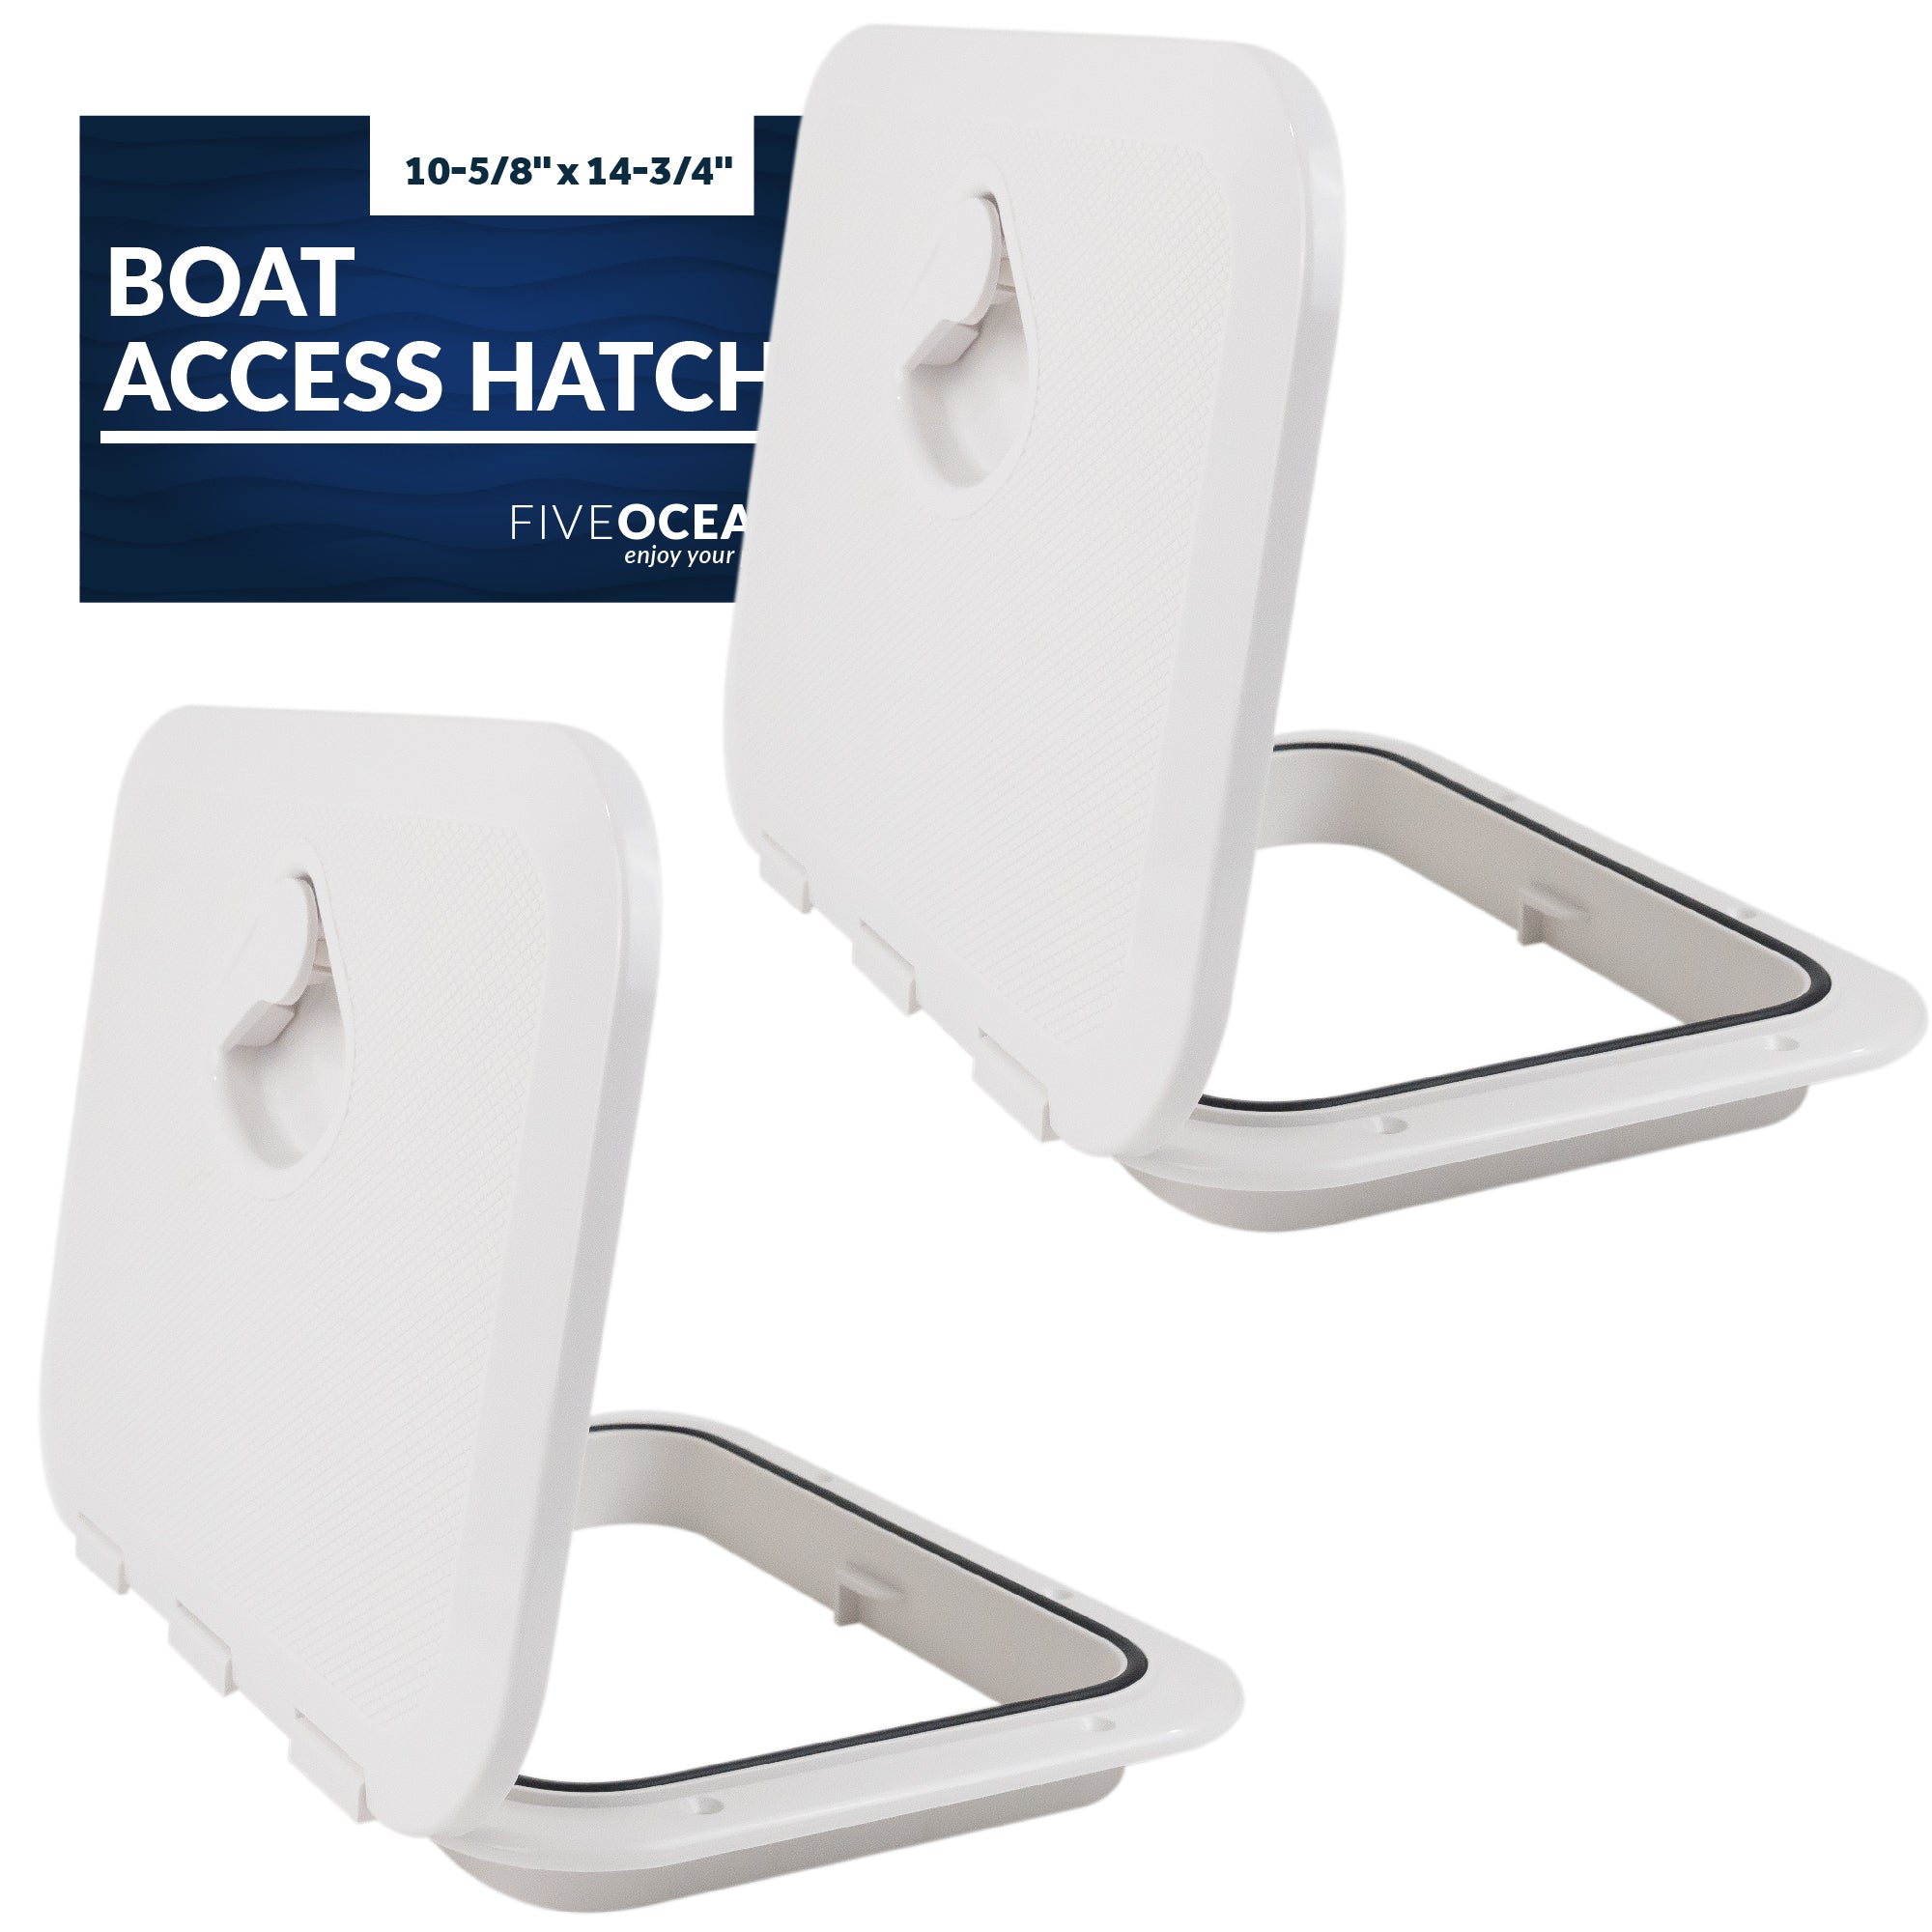 Boat Access Hatch 10-5/8" x 14-3/4" Recessed Handle Locking System, White, 2-Pack - FO3624-M2